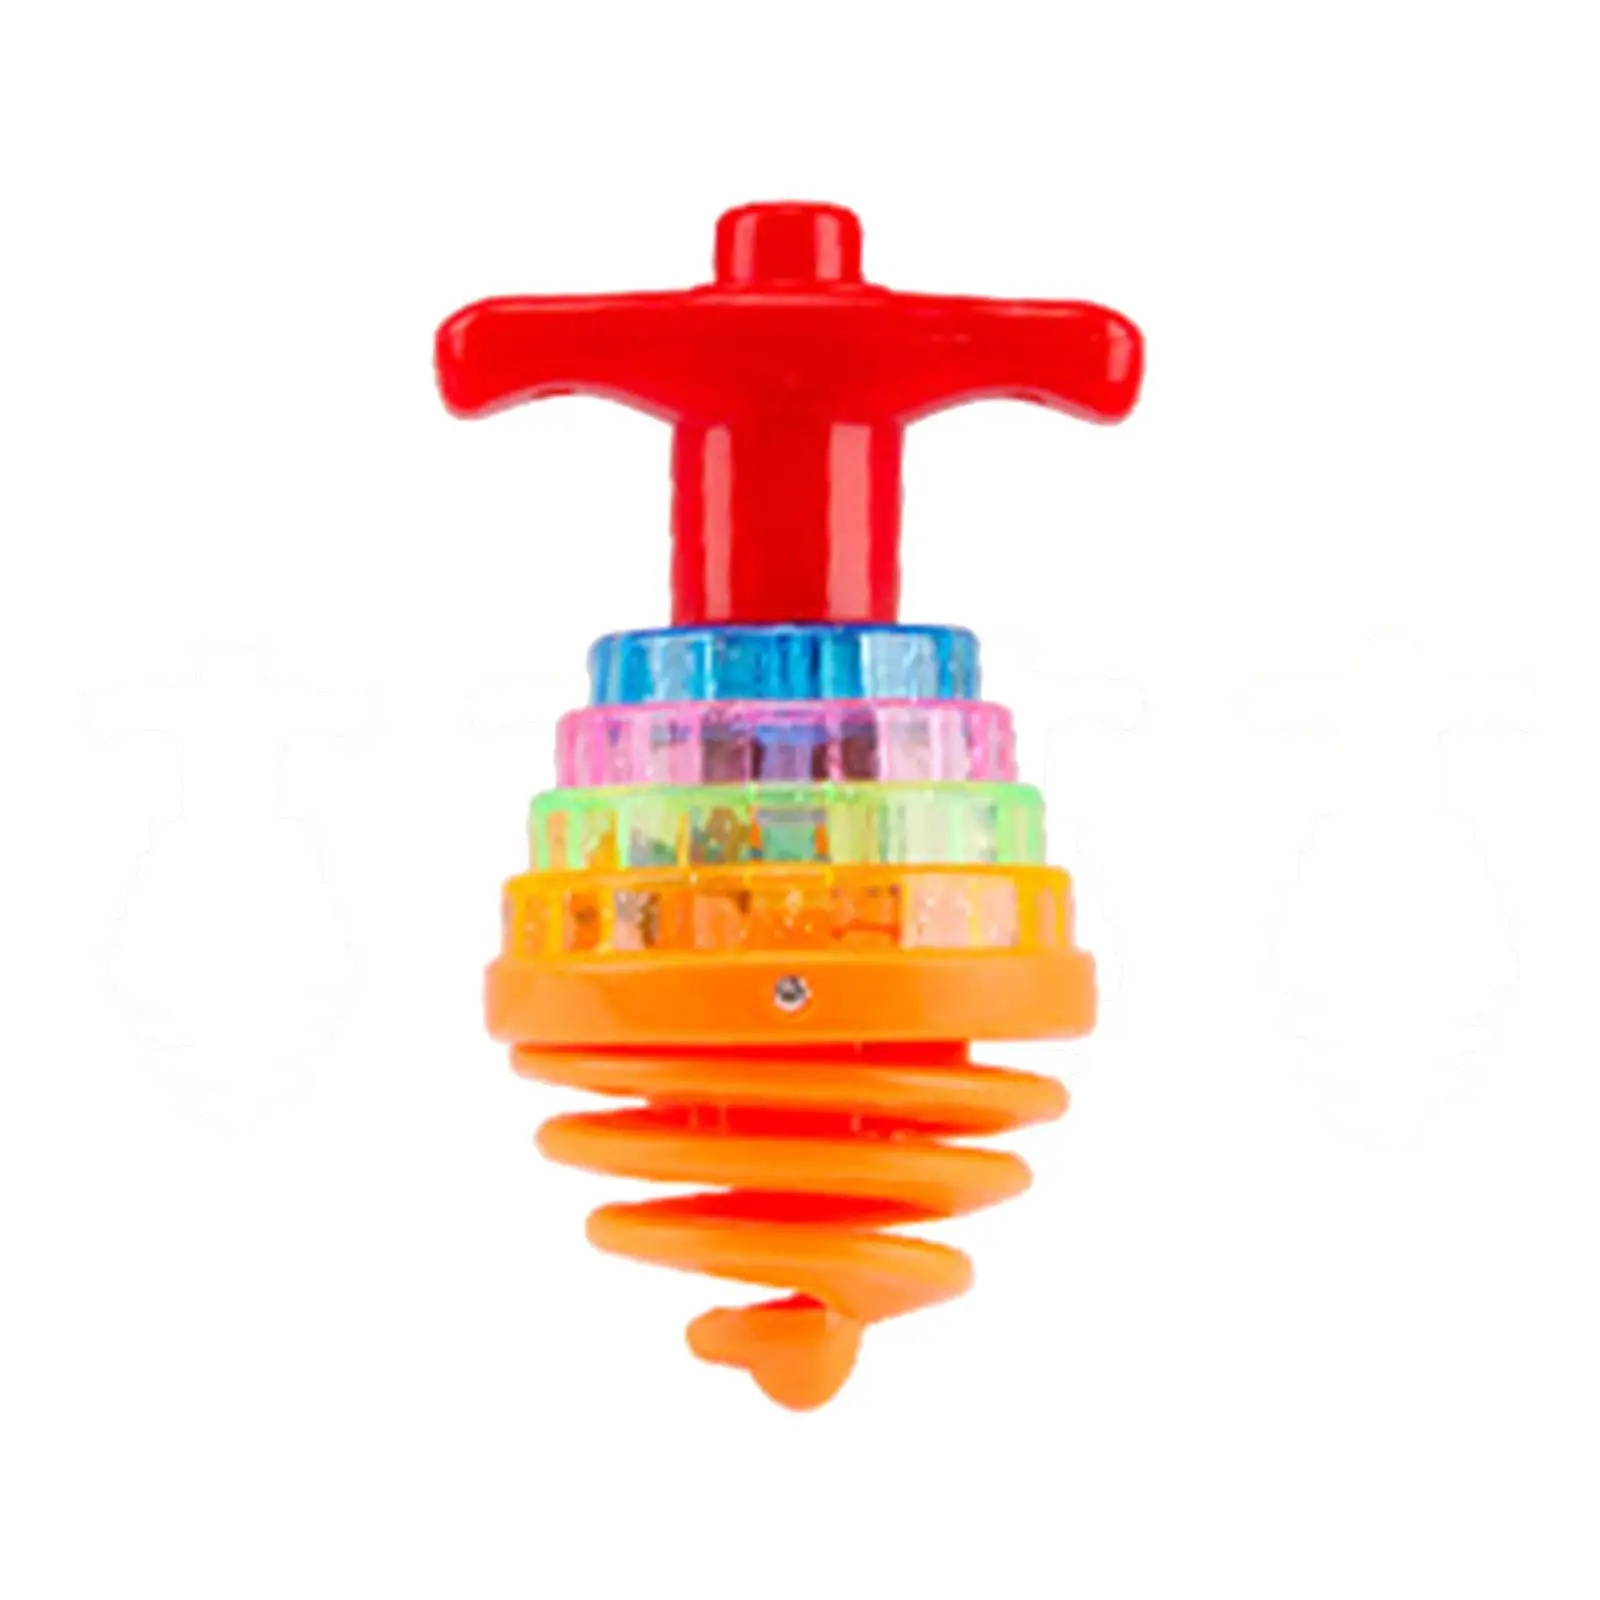 Top Toys Gyro Novelty Traditional Baby Toys Spiral Gyrator Exercise Child Cognition Rotating Top for Party Favor